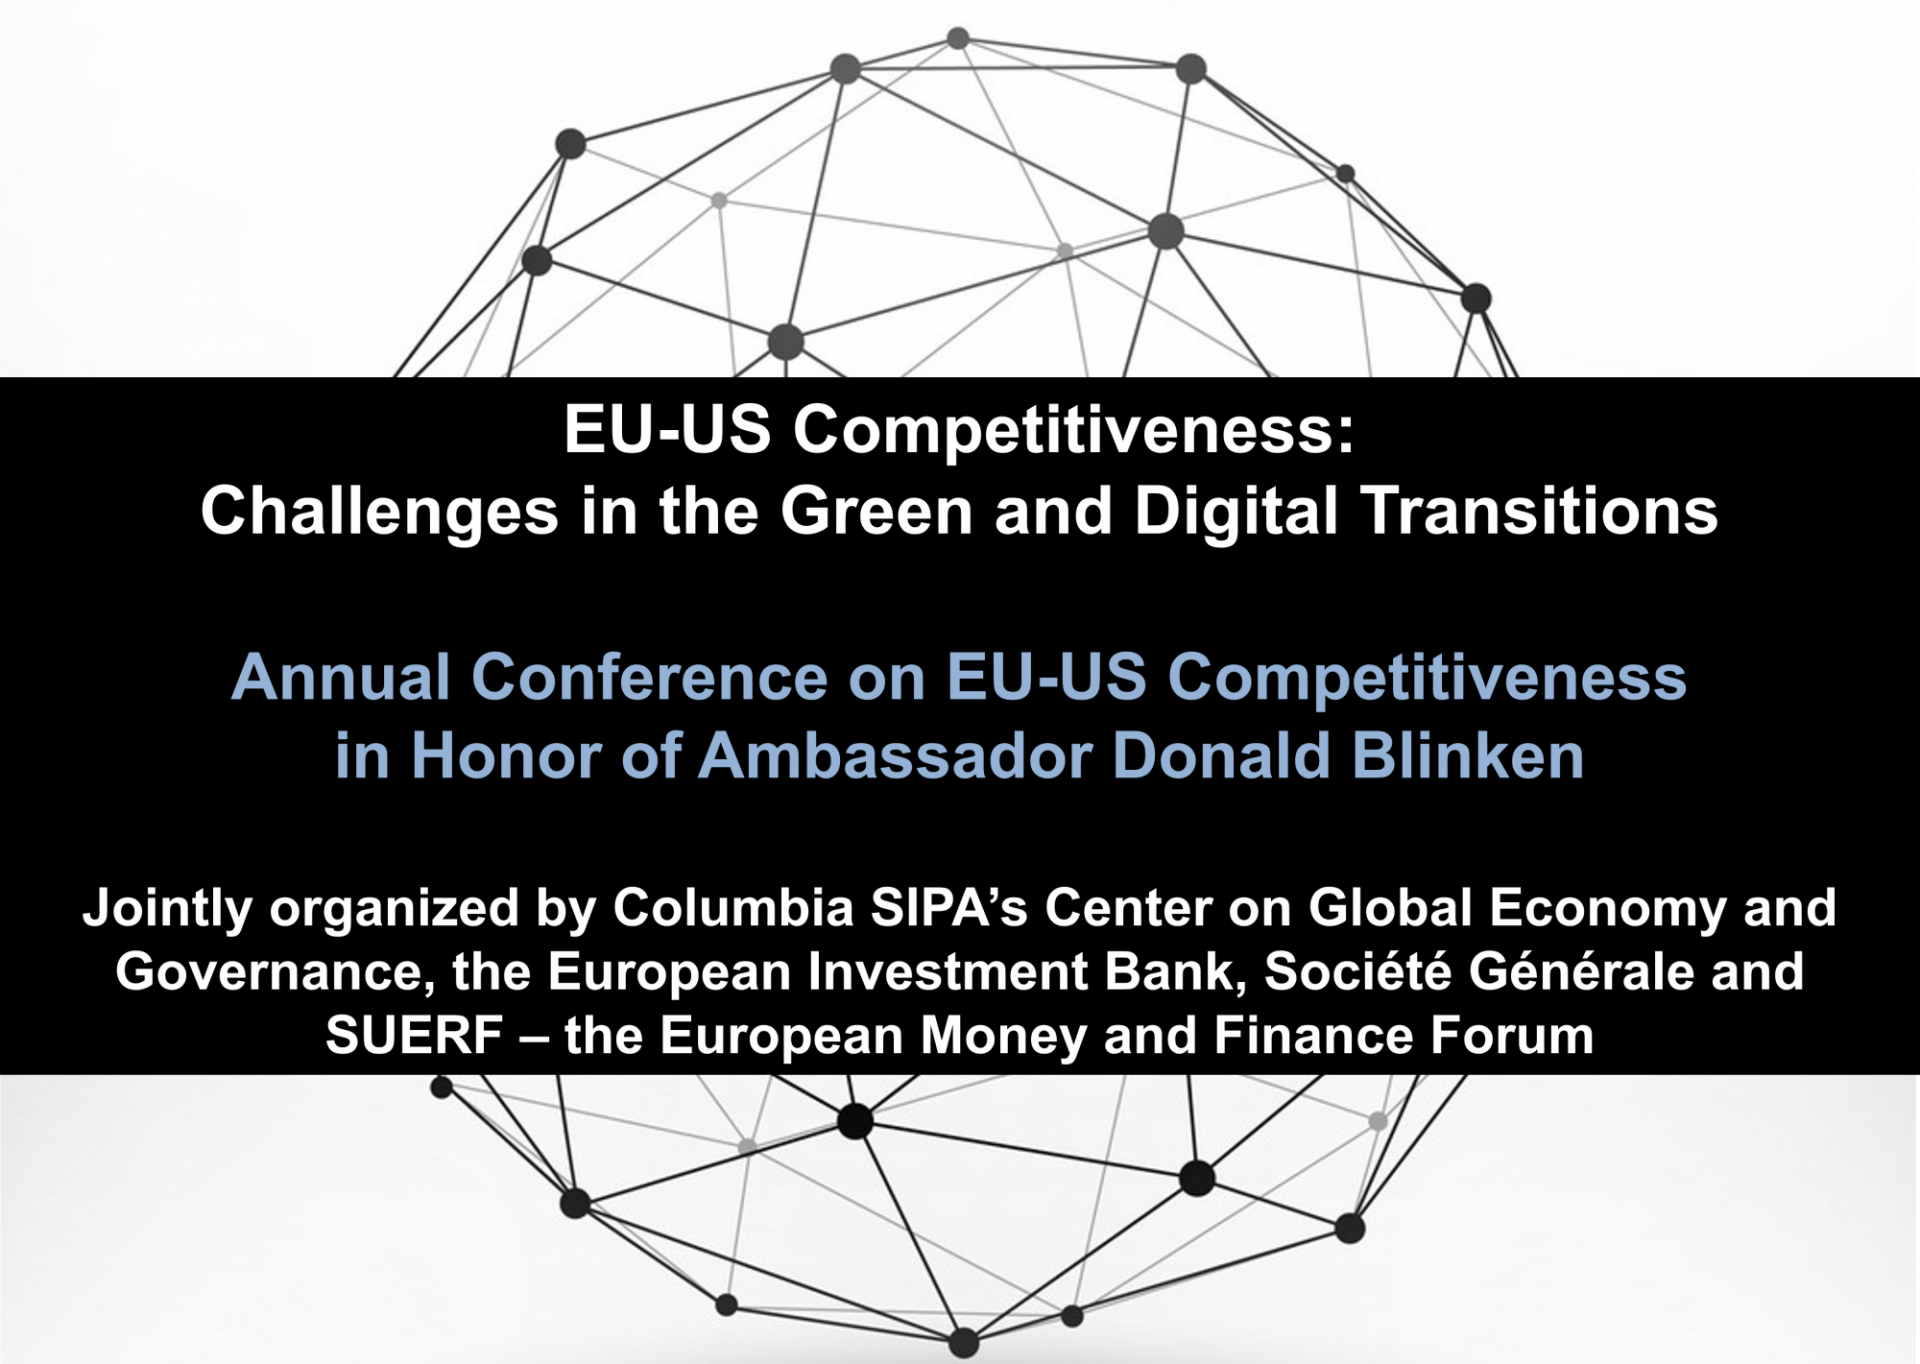 EU-US Conference on Competitiveness 